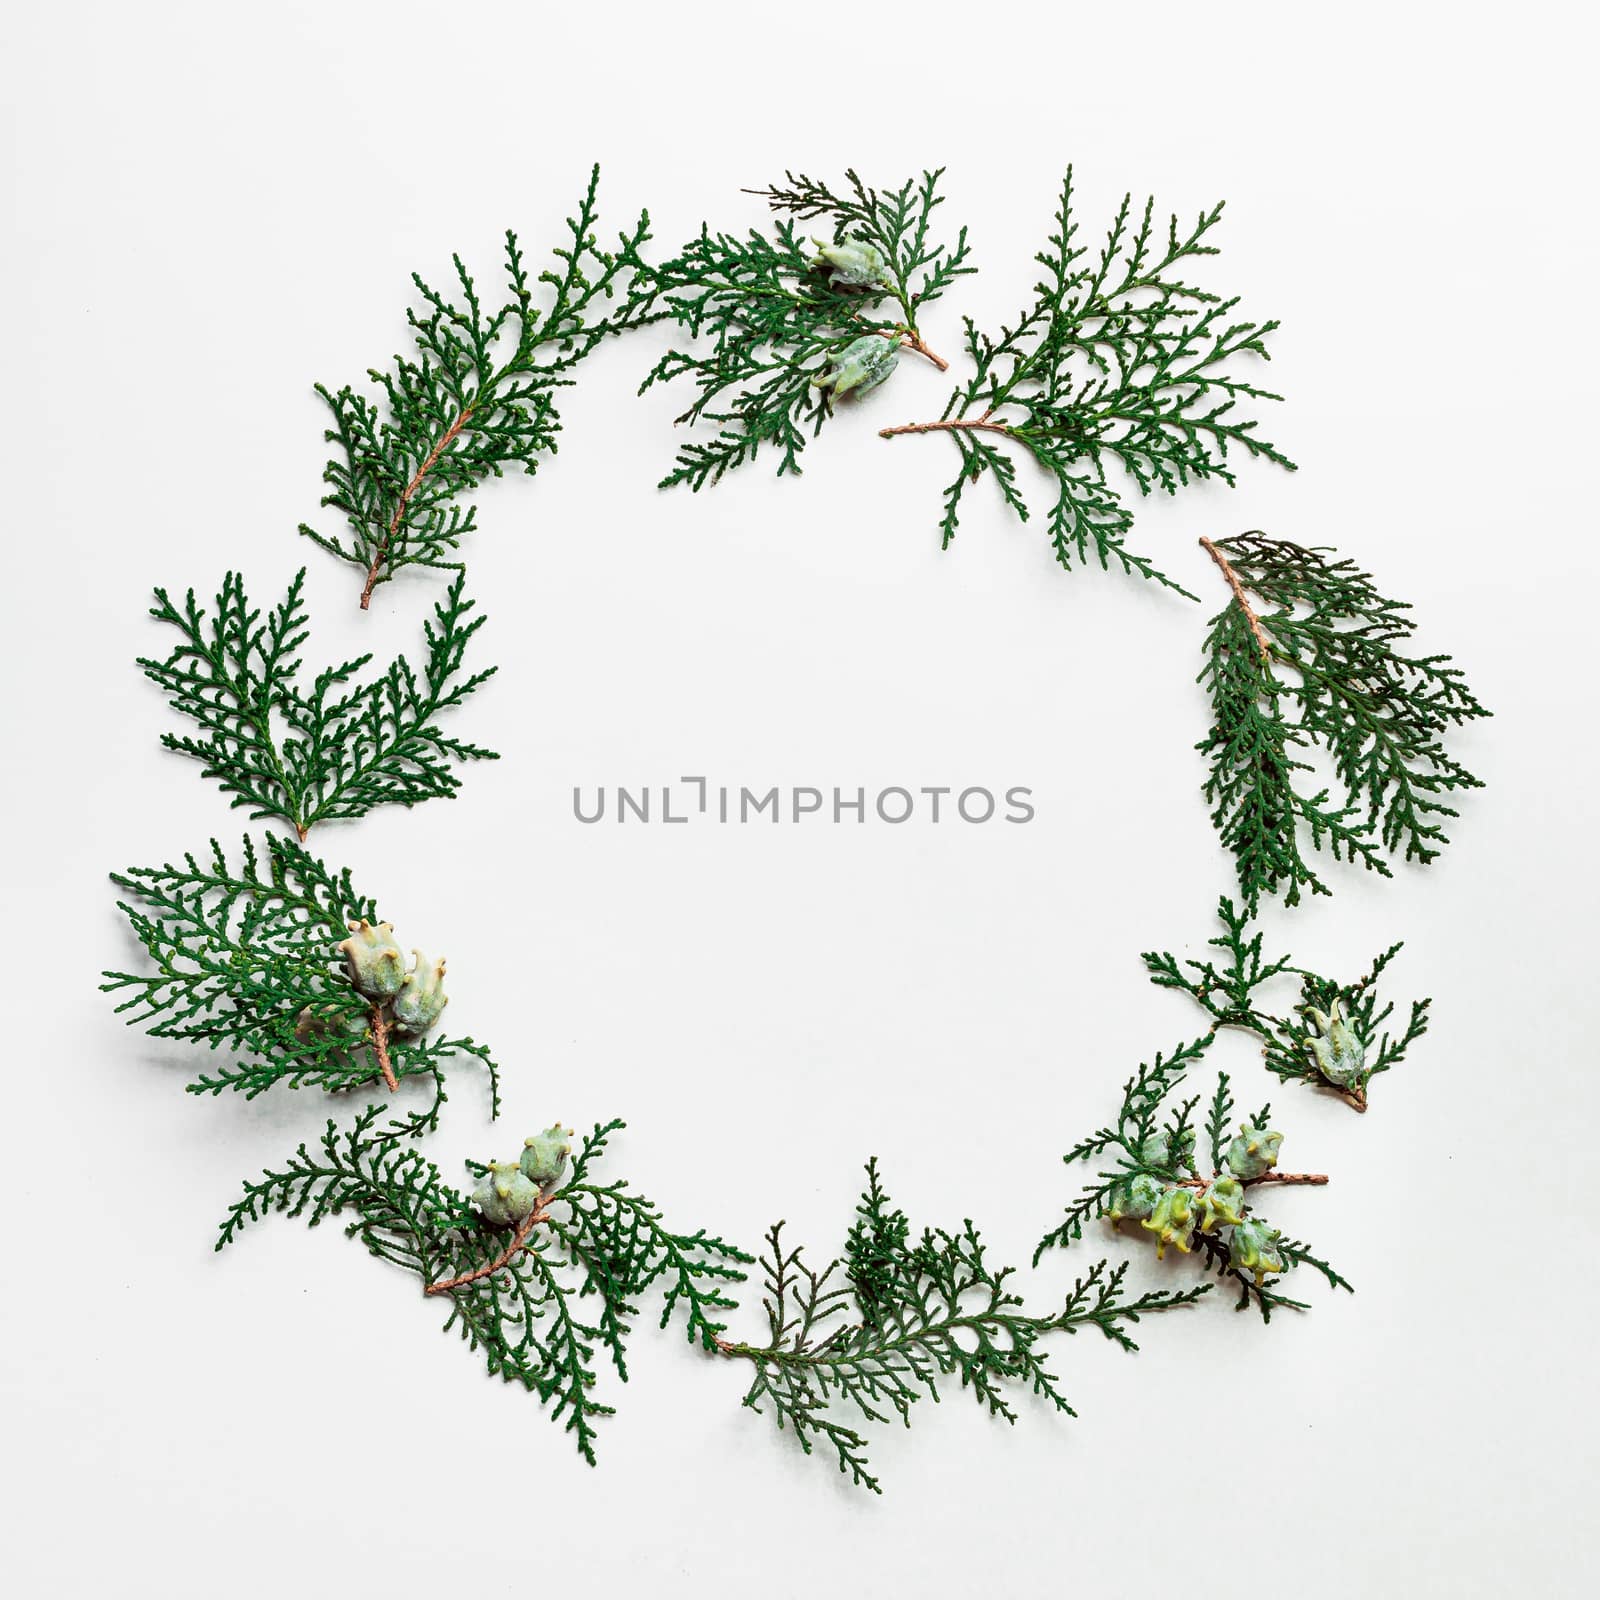 Minimal Christmas circle shaped pattern with copy space. Fir tree or cypress branches on white background. Negative space for design in center. Christmas, winter, new year concept. Flat lay, top view